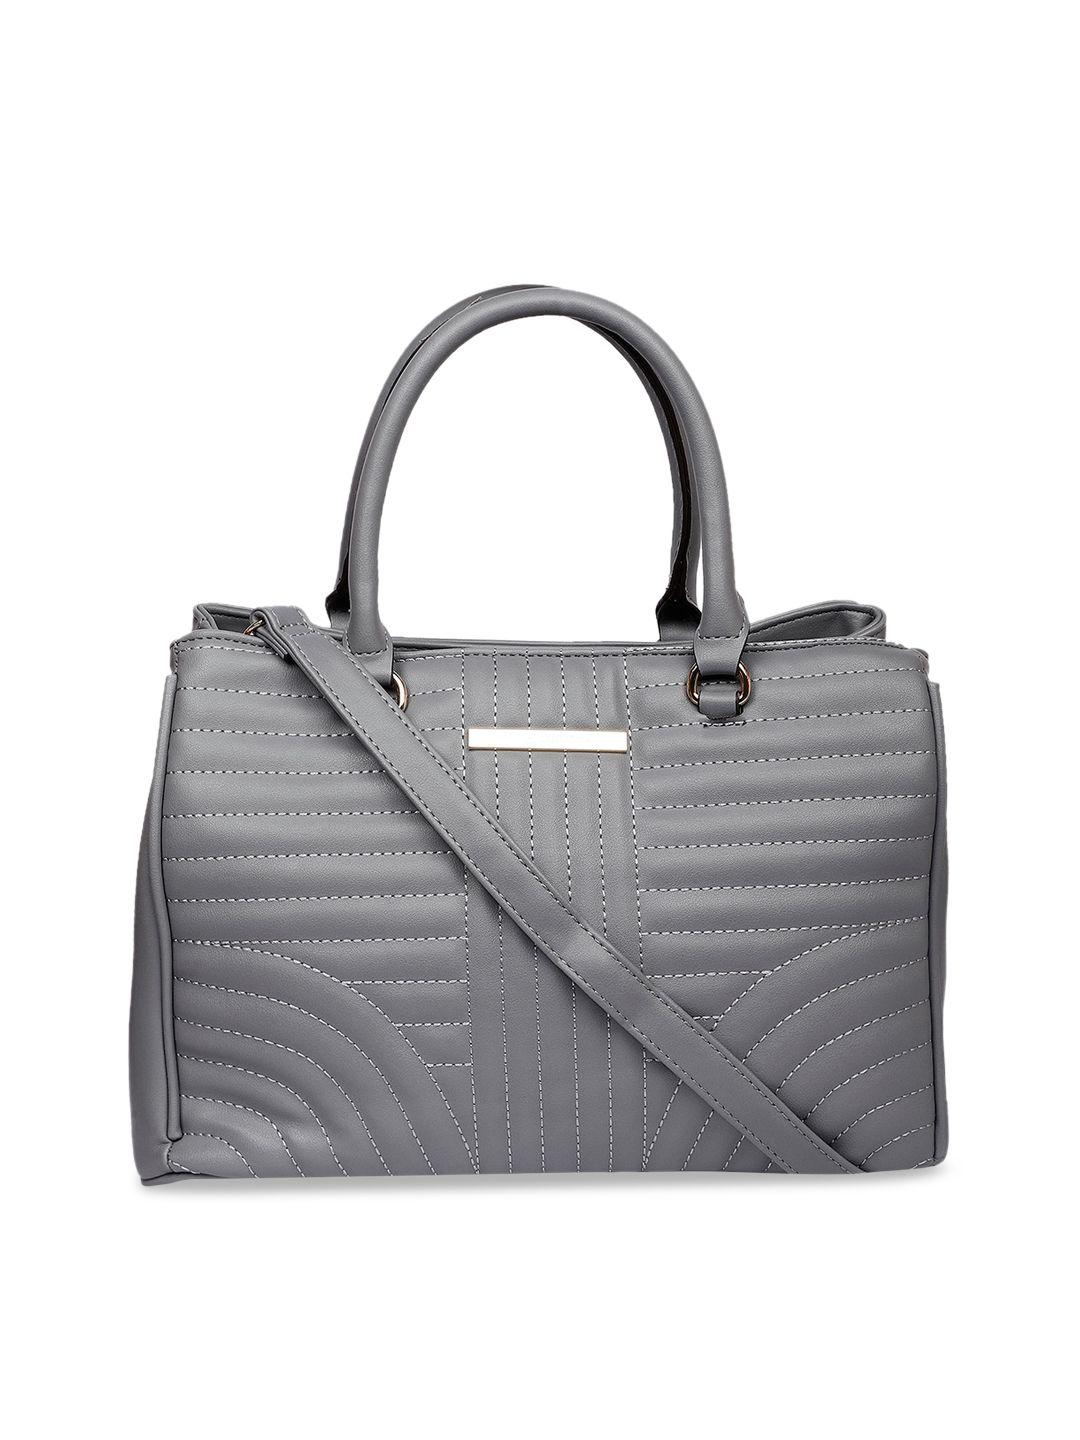 marie claire grey textured structured handheld bag